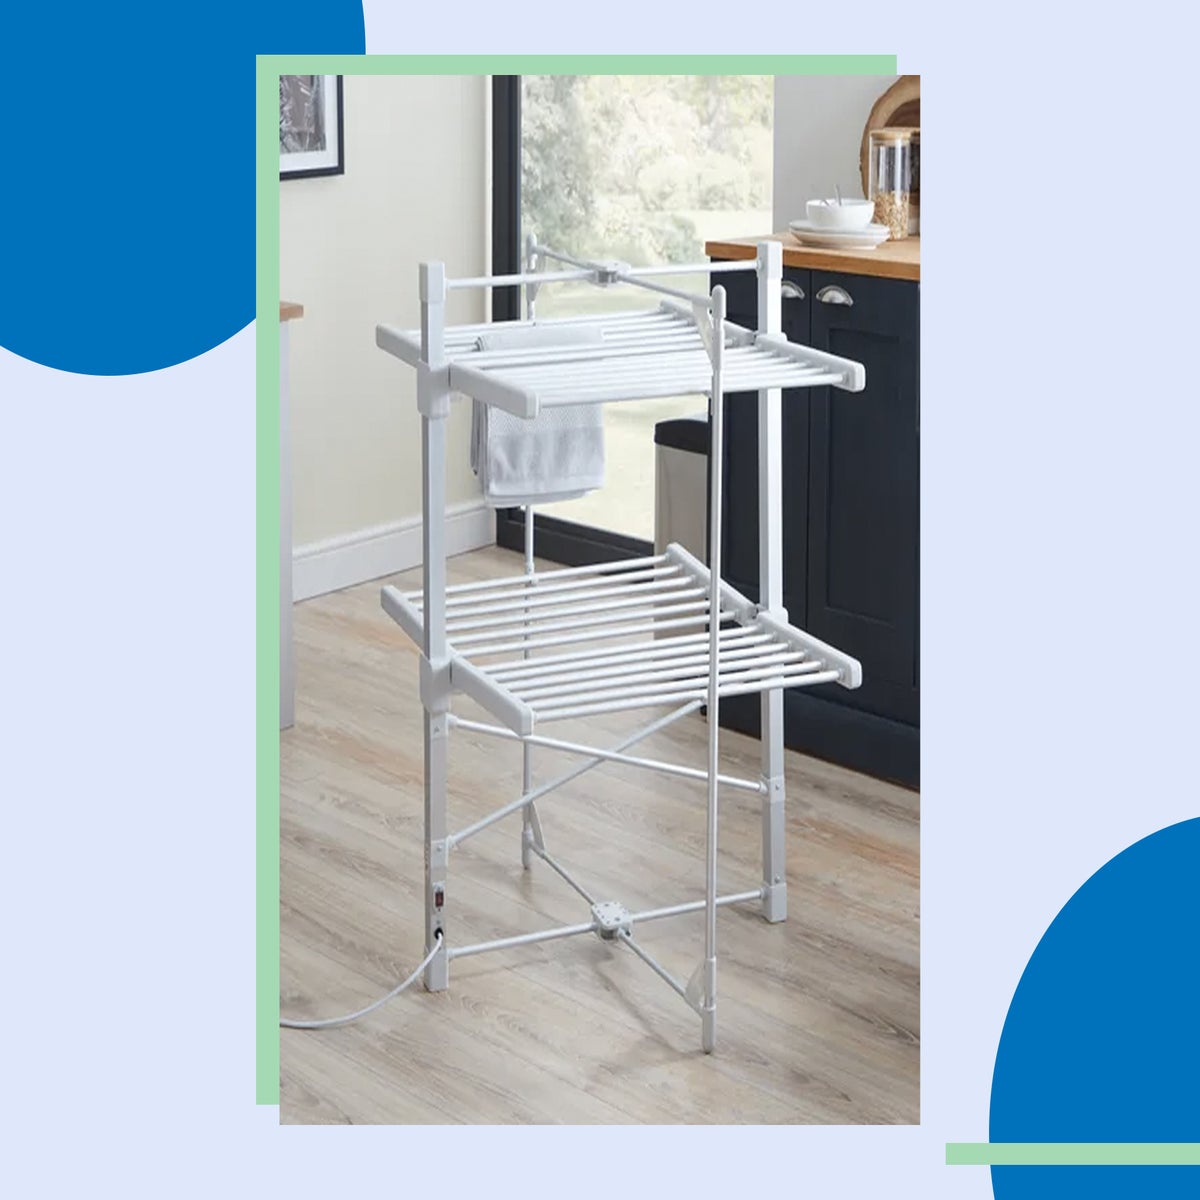 Dry Soon 3-Tier Heated Clothes Airer Review (Dry:Soon) 